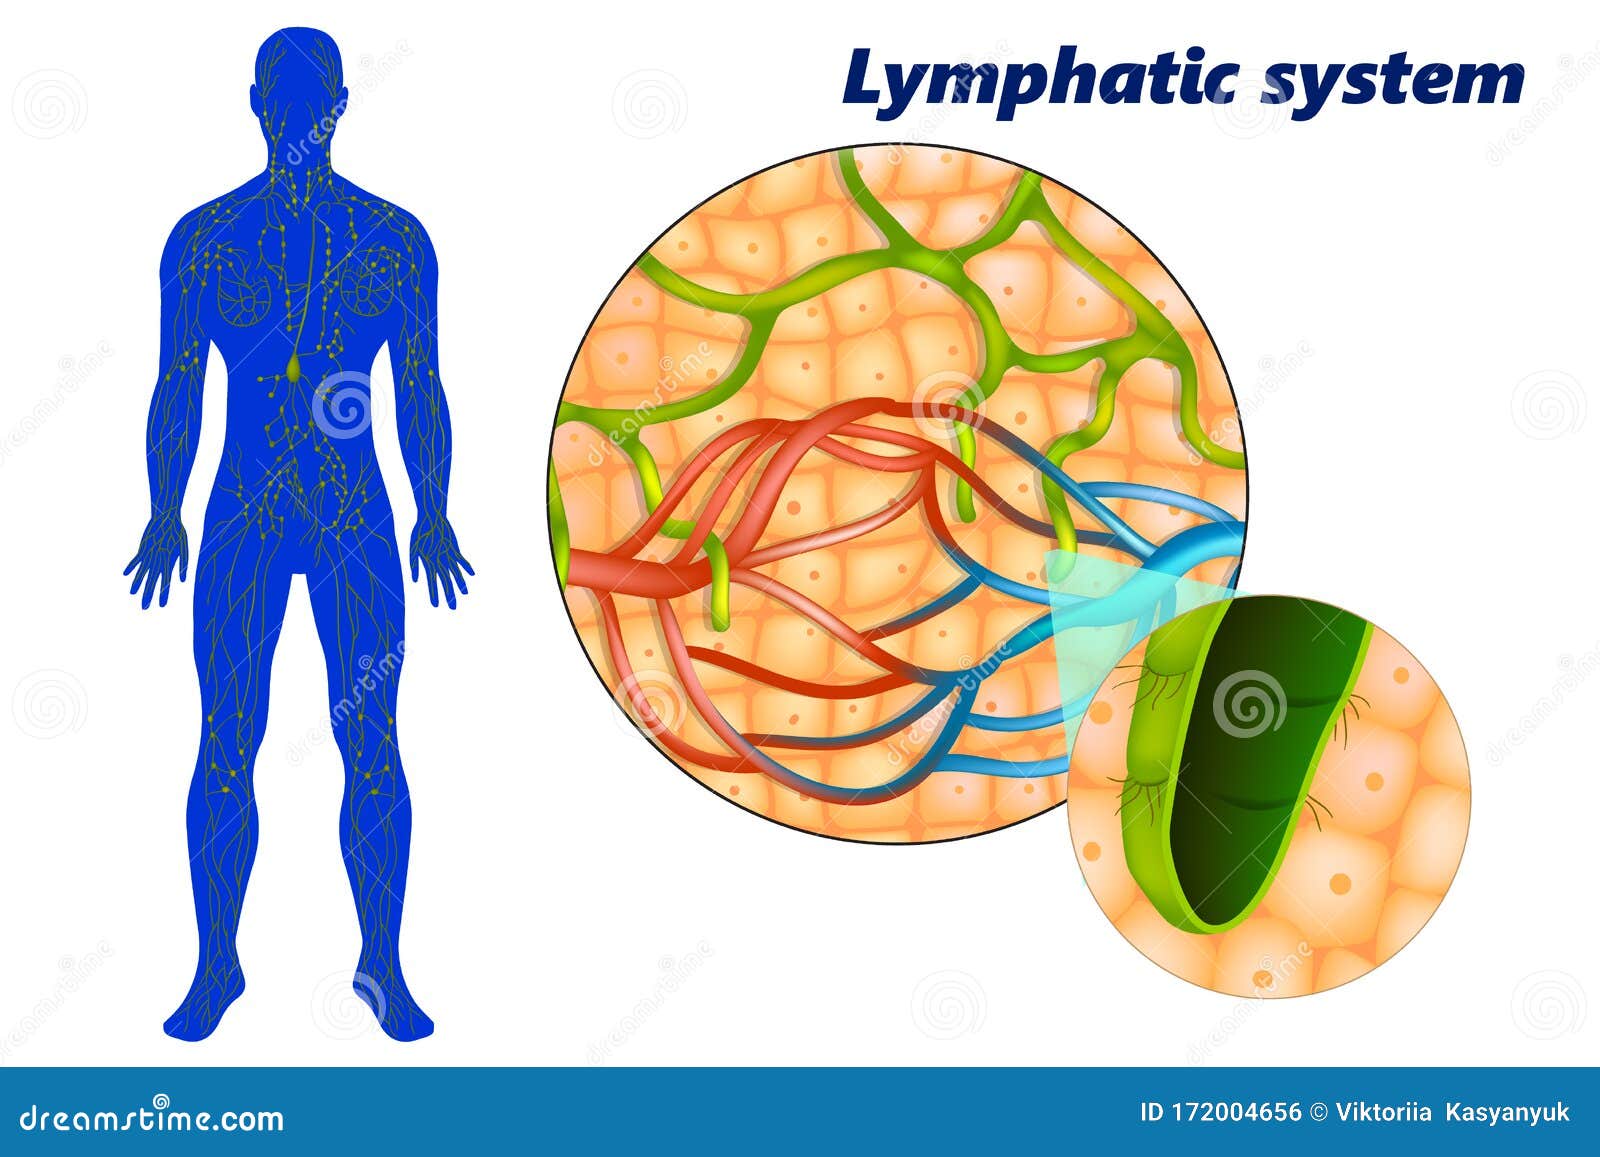 lymph capillaries in the tissue spaces